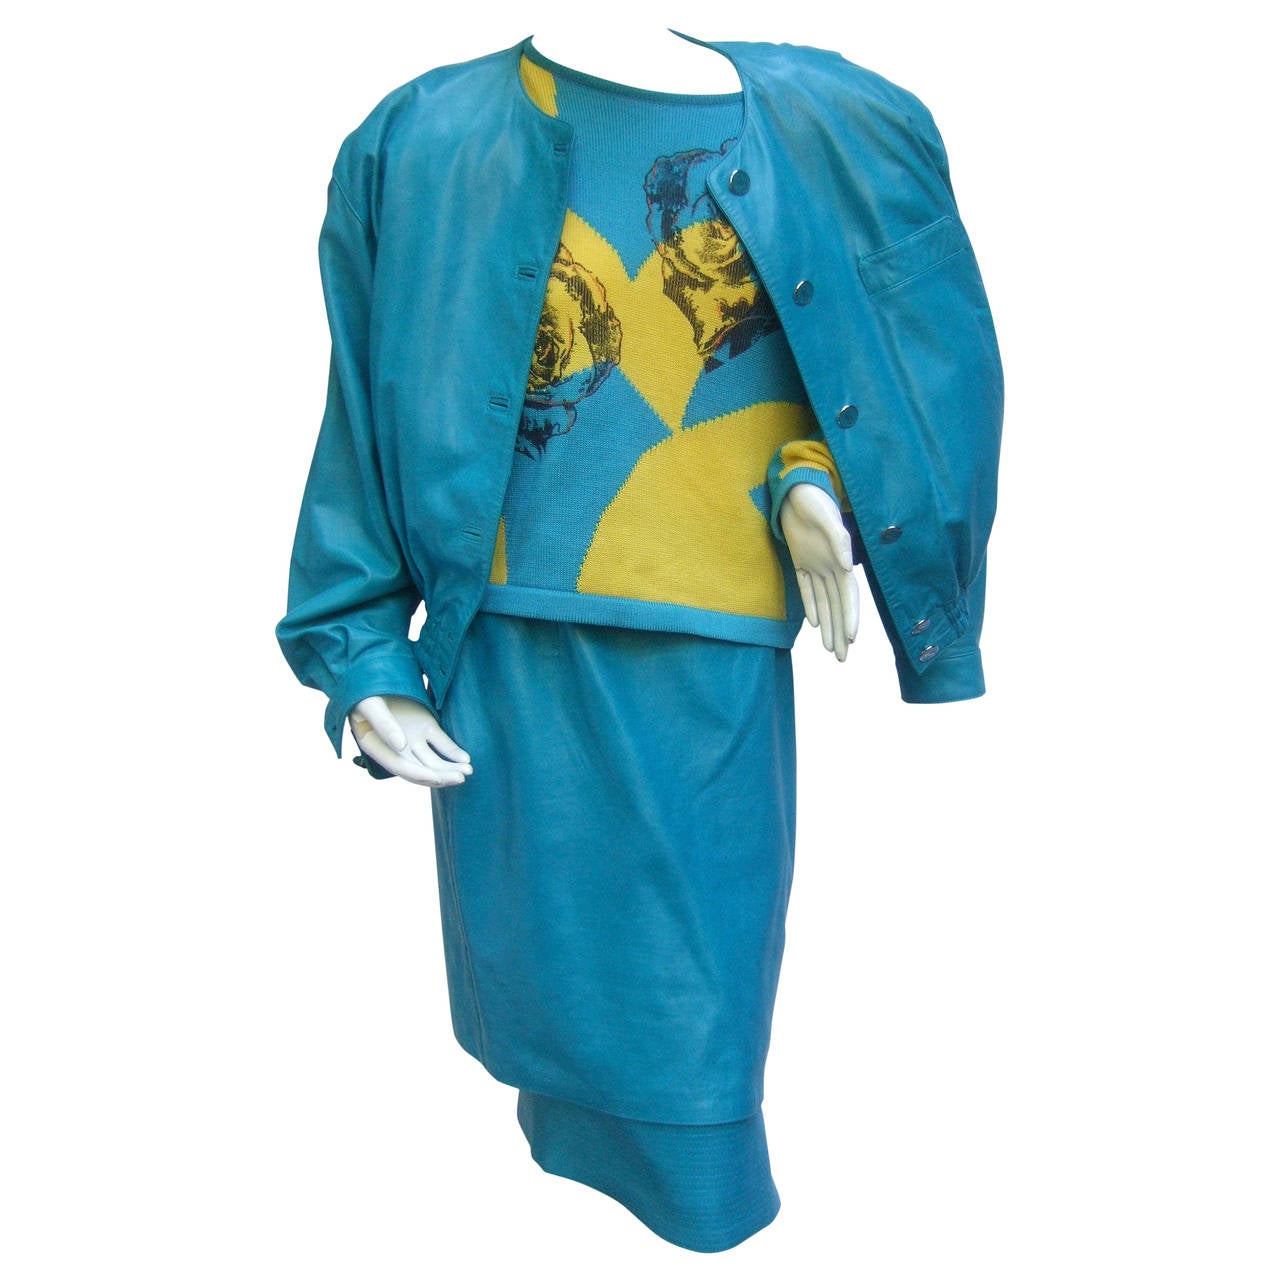 Louis Feraud Turquoise Leather Andy Warhol Inspired Skirt Suit c 1980s